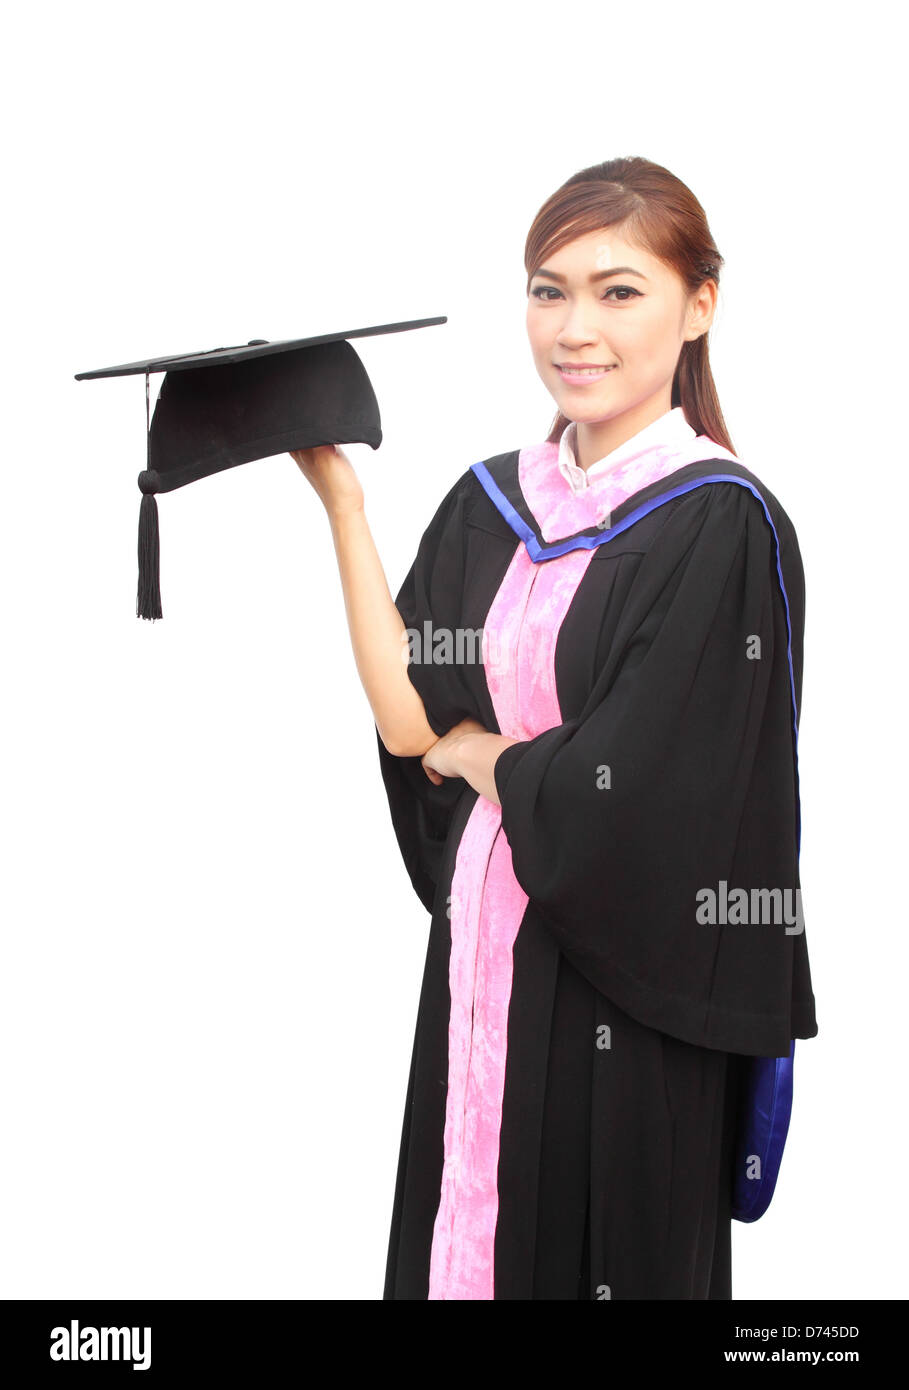 woman with graduation cap and gown on white background Stock Photo